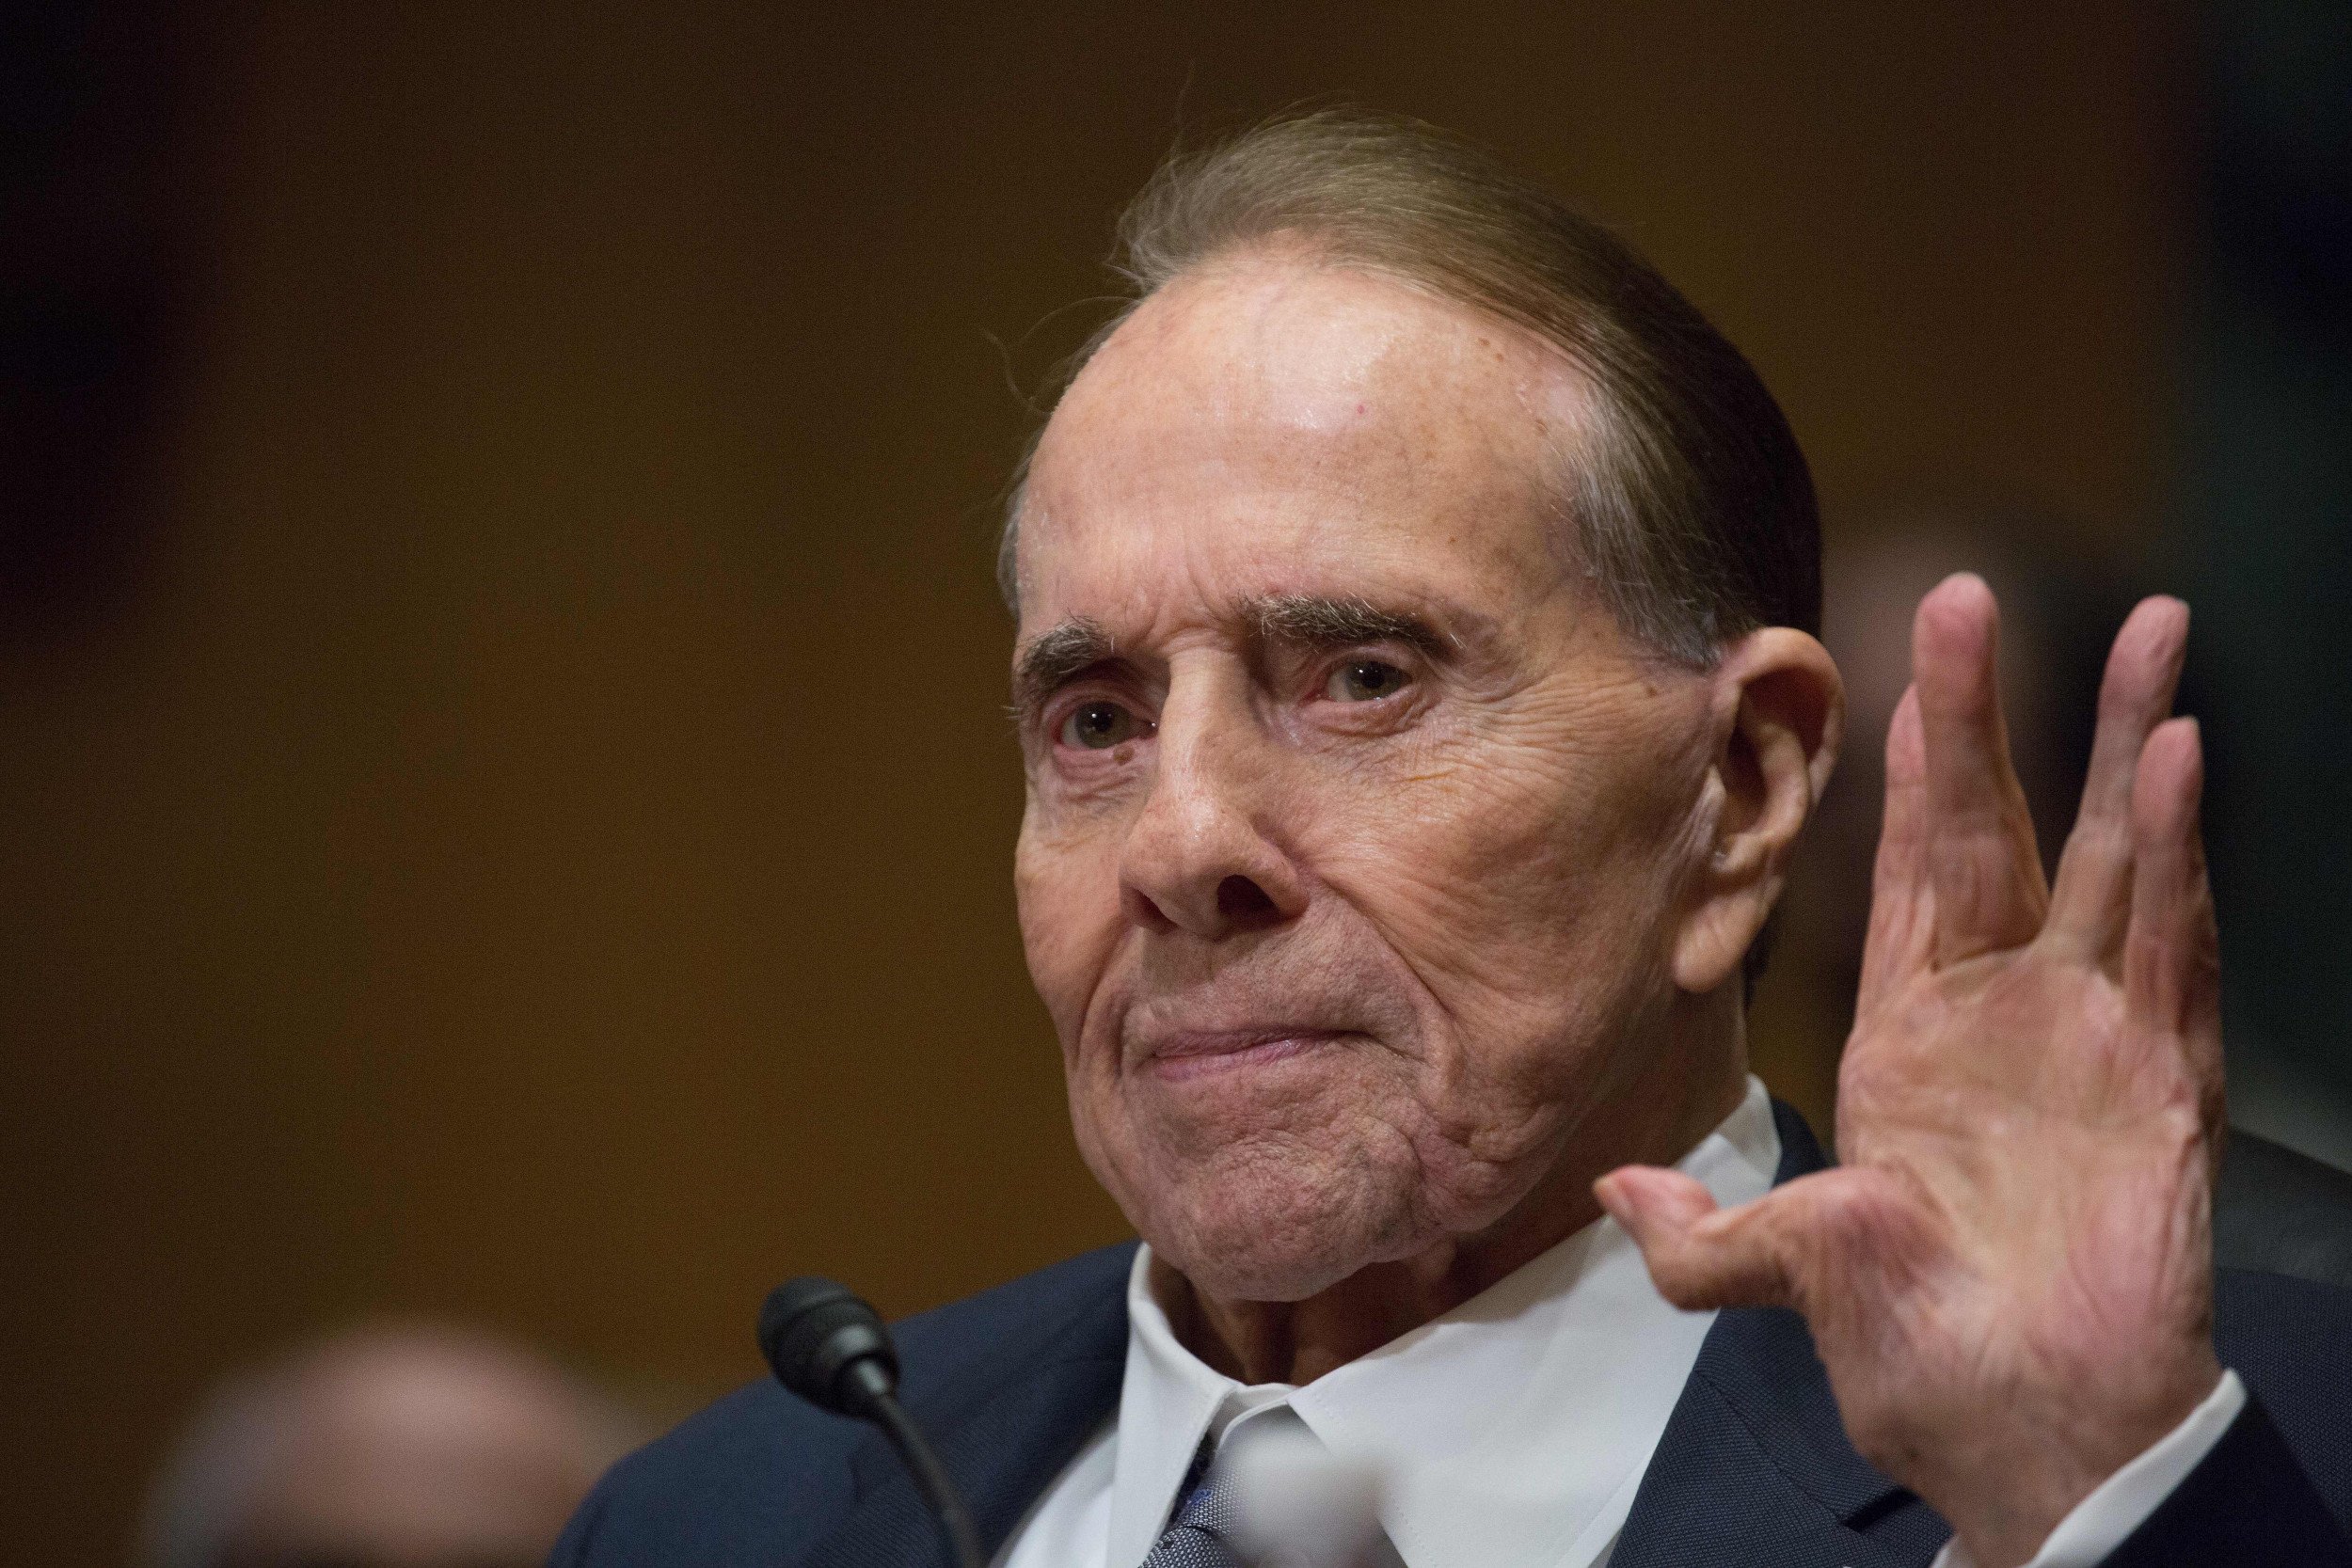 Bob Dole Former GOP Senate Leader And Presidential Candidate Dies At 98